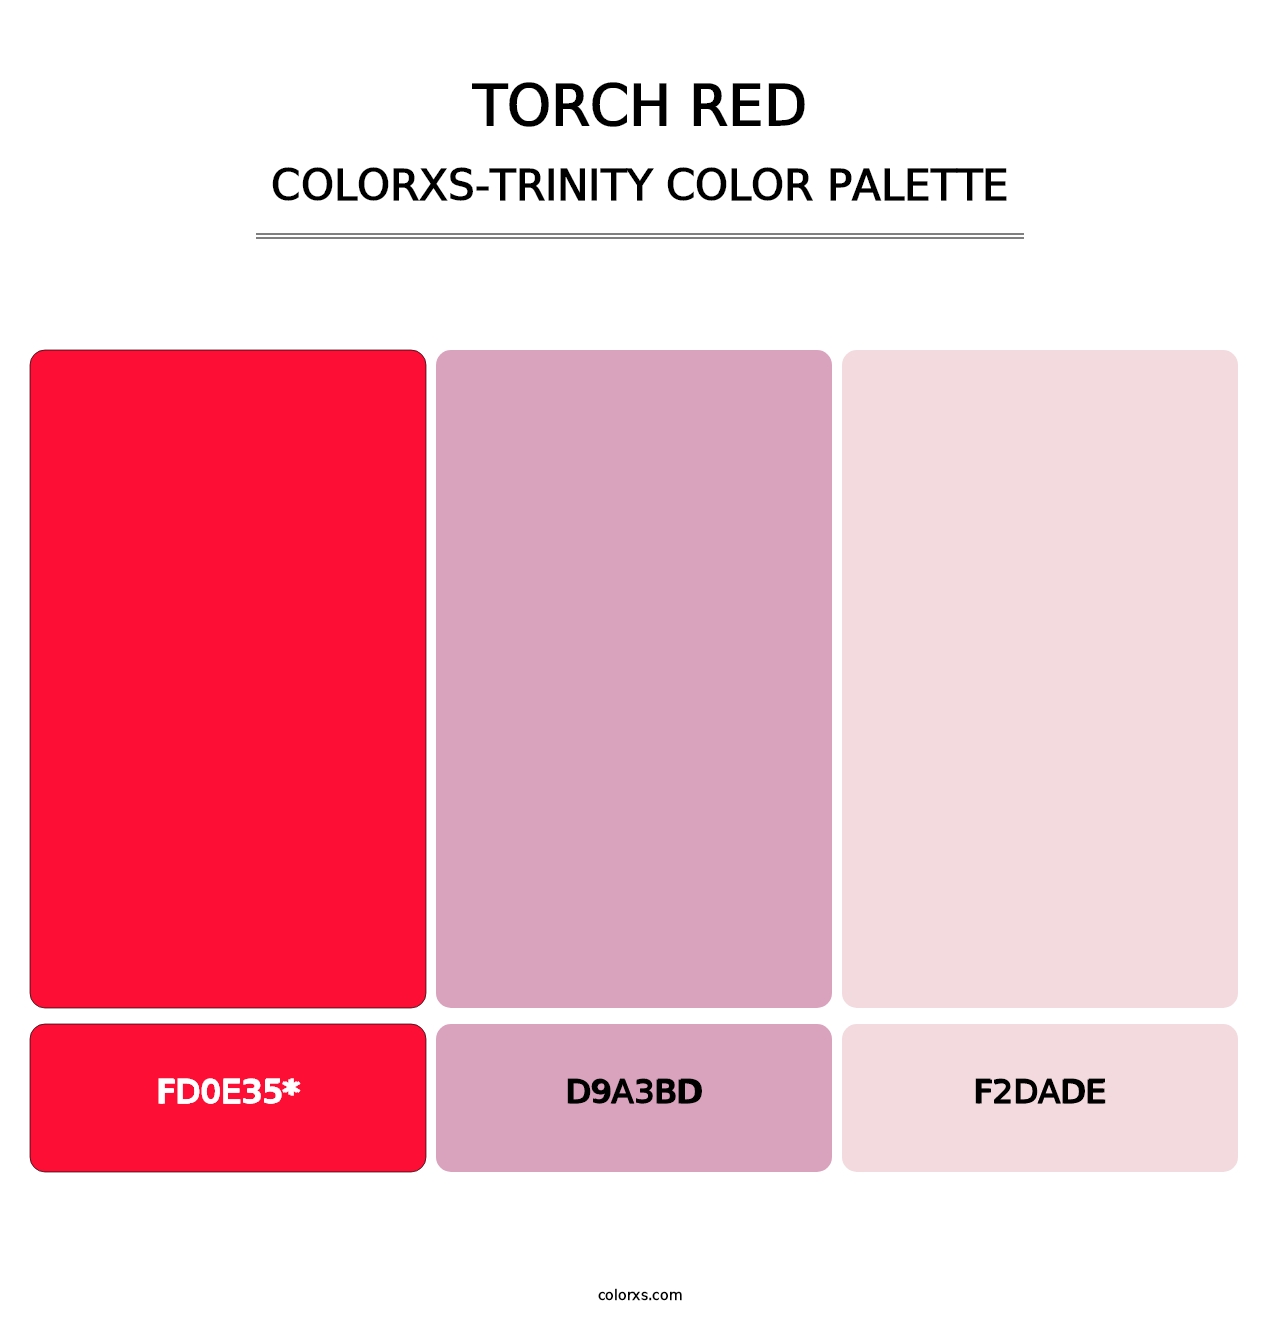 Torch Red - Colorxs Trinity Palette